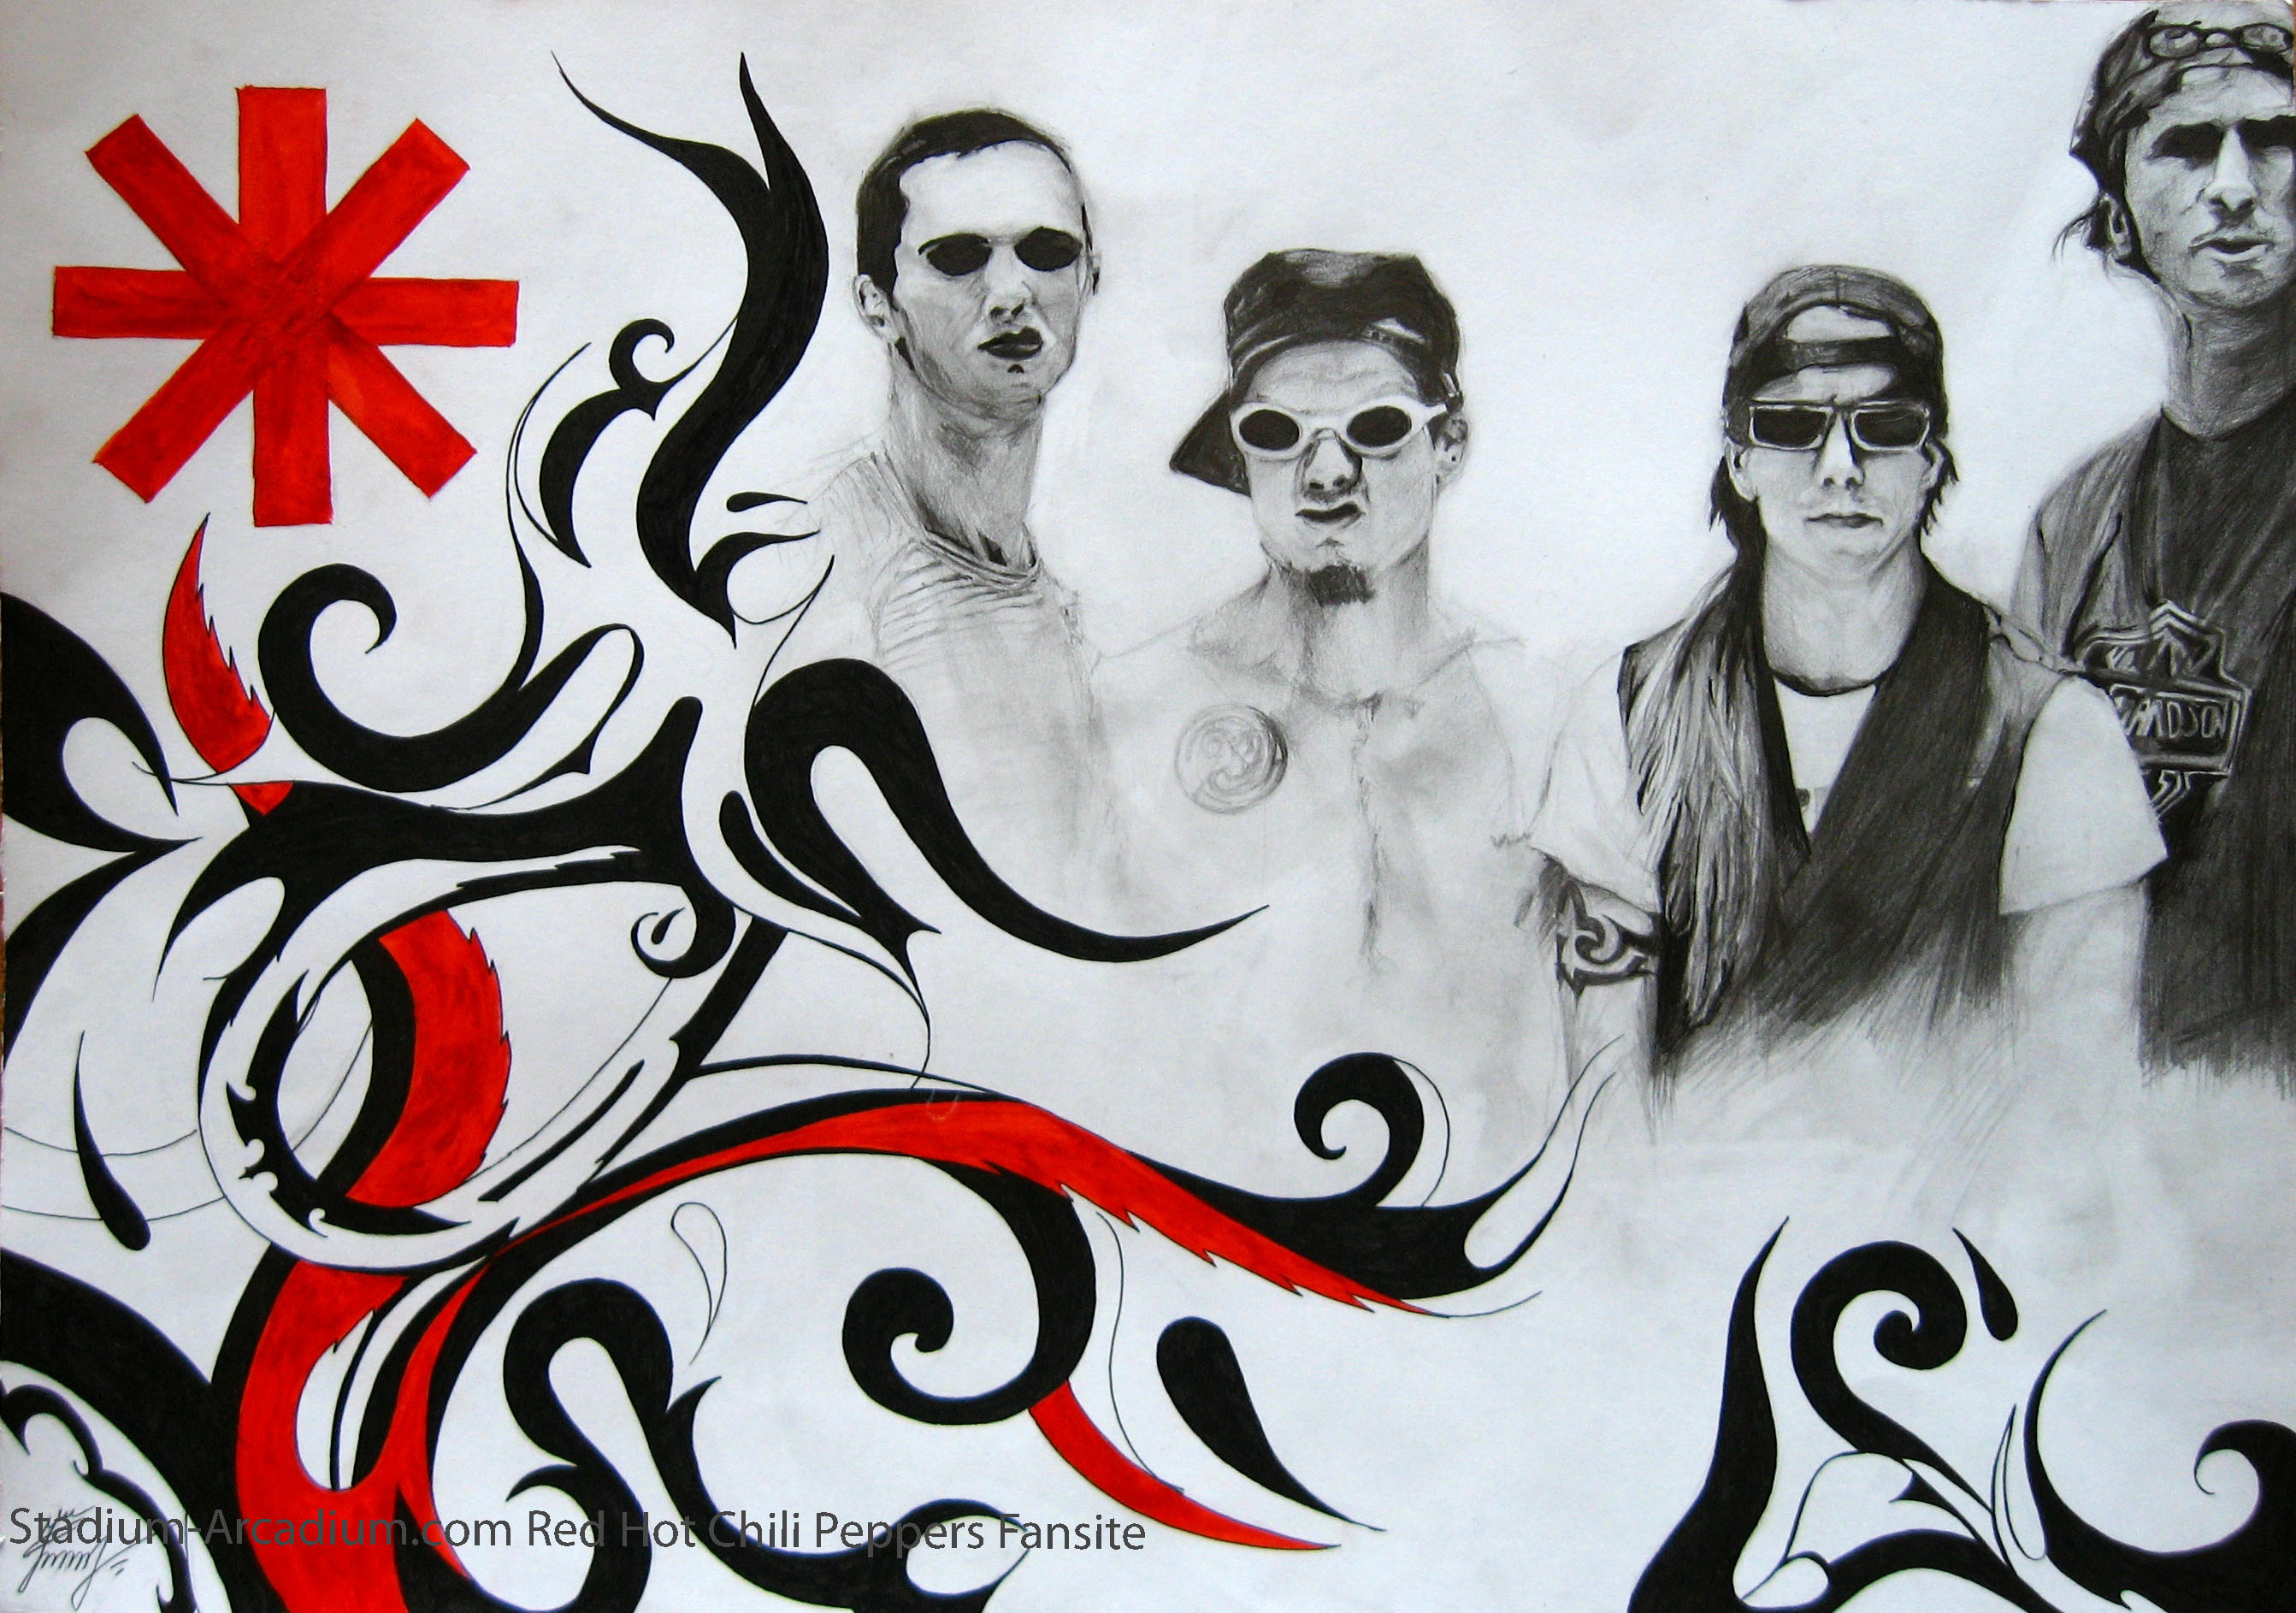 Red Hot Chili Peppers Wallpaper by MetalSlasher on DeviantArt